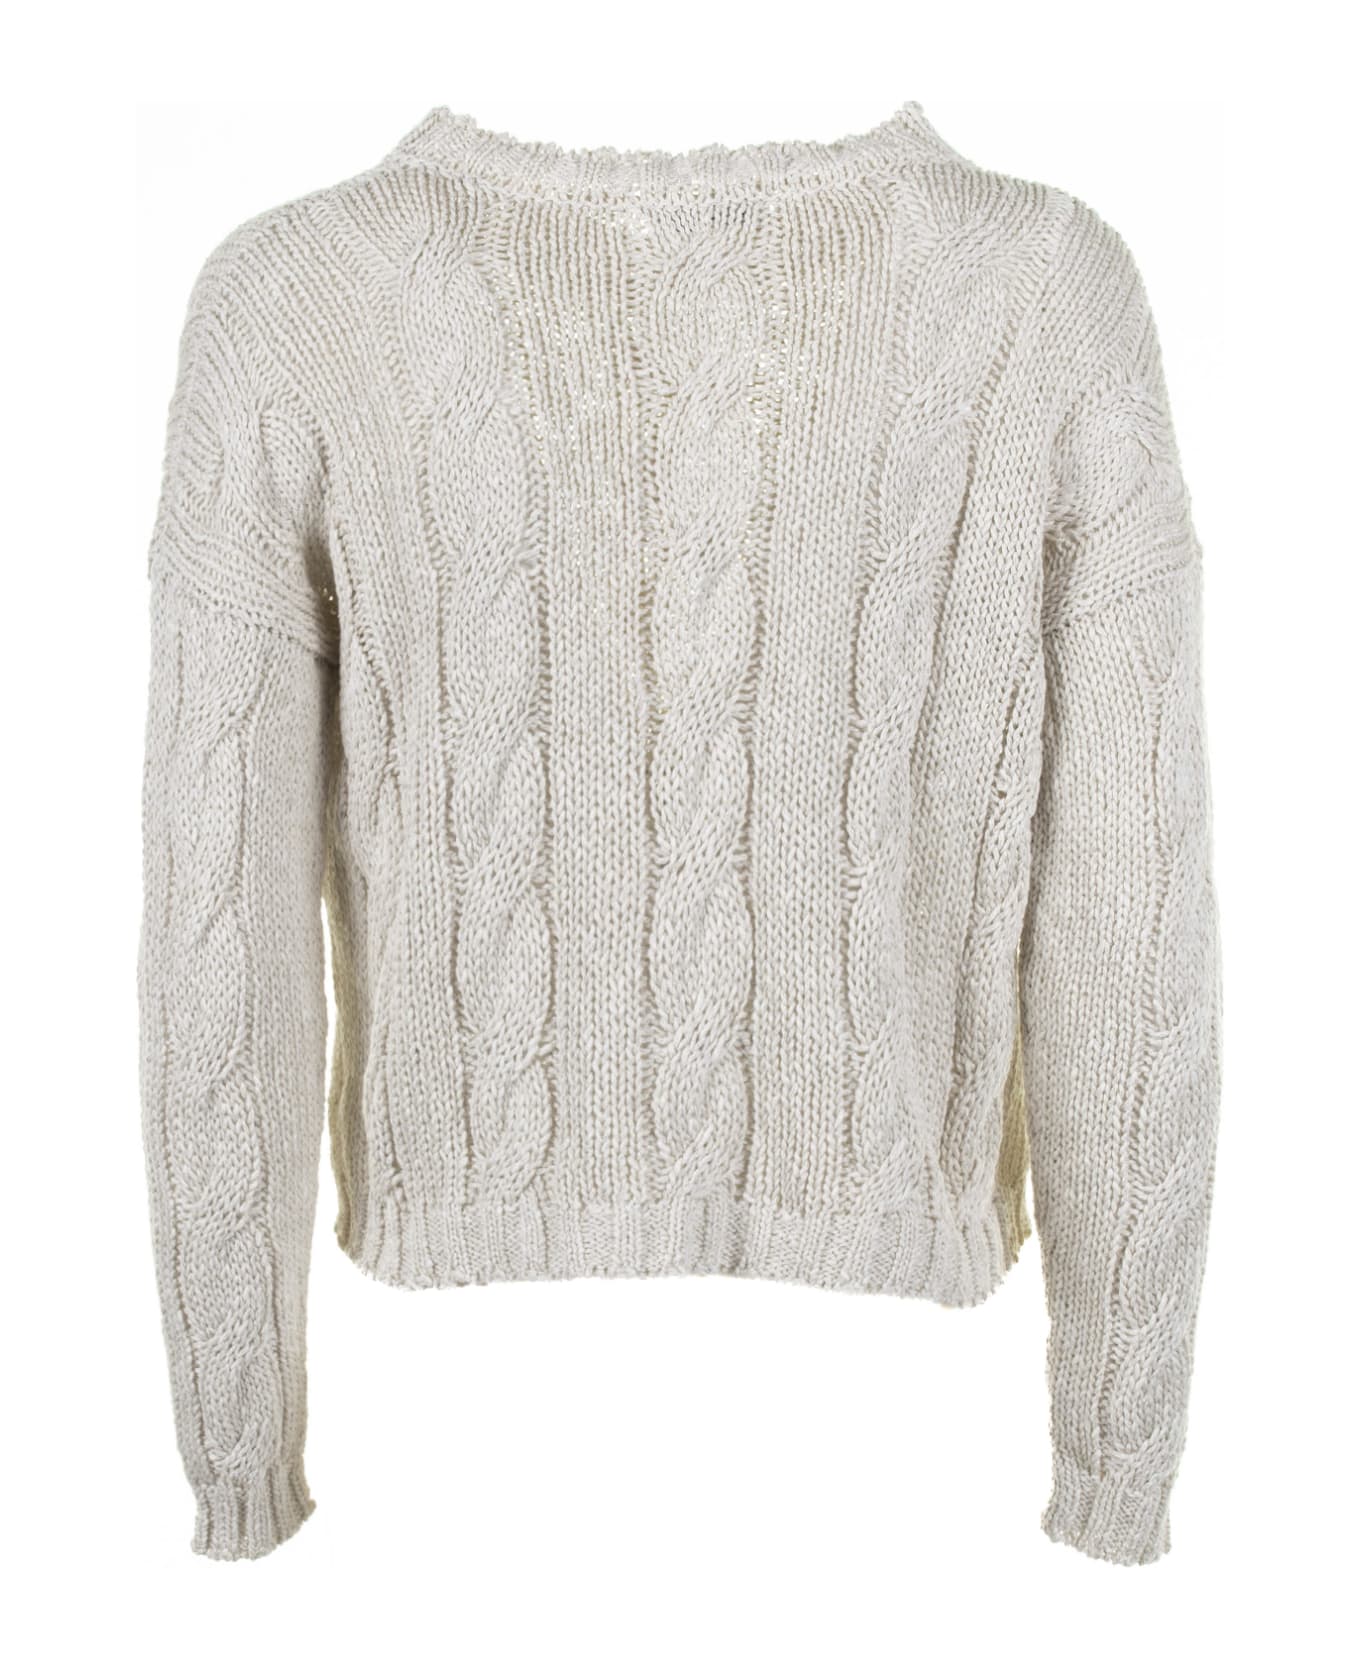 Base Crew-neck Sweater With Braid Motif - GESSO